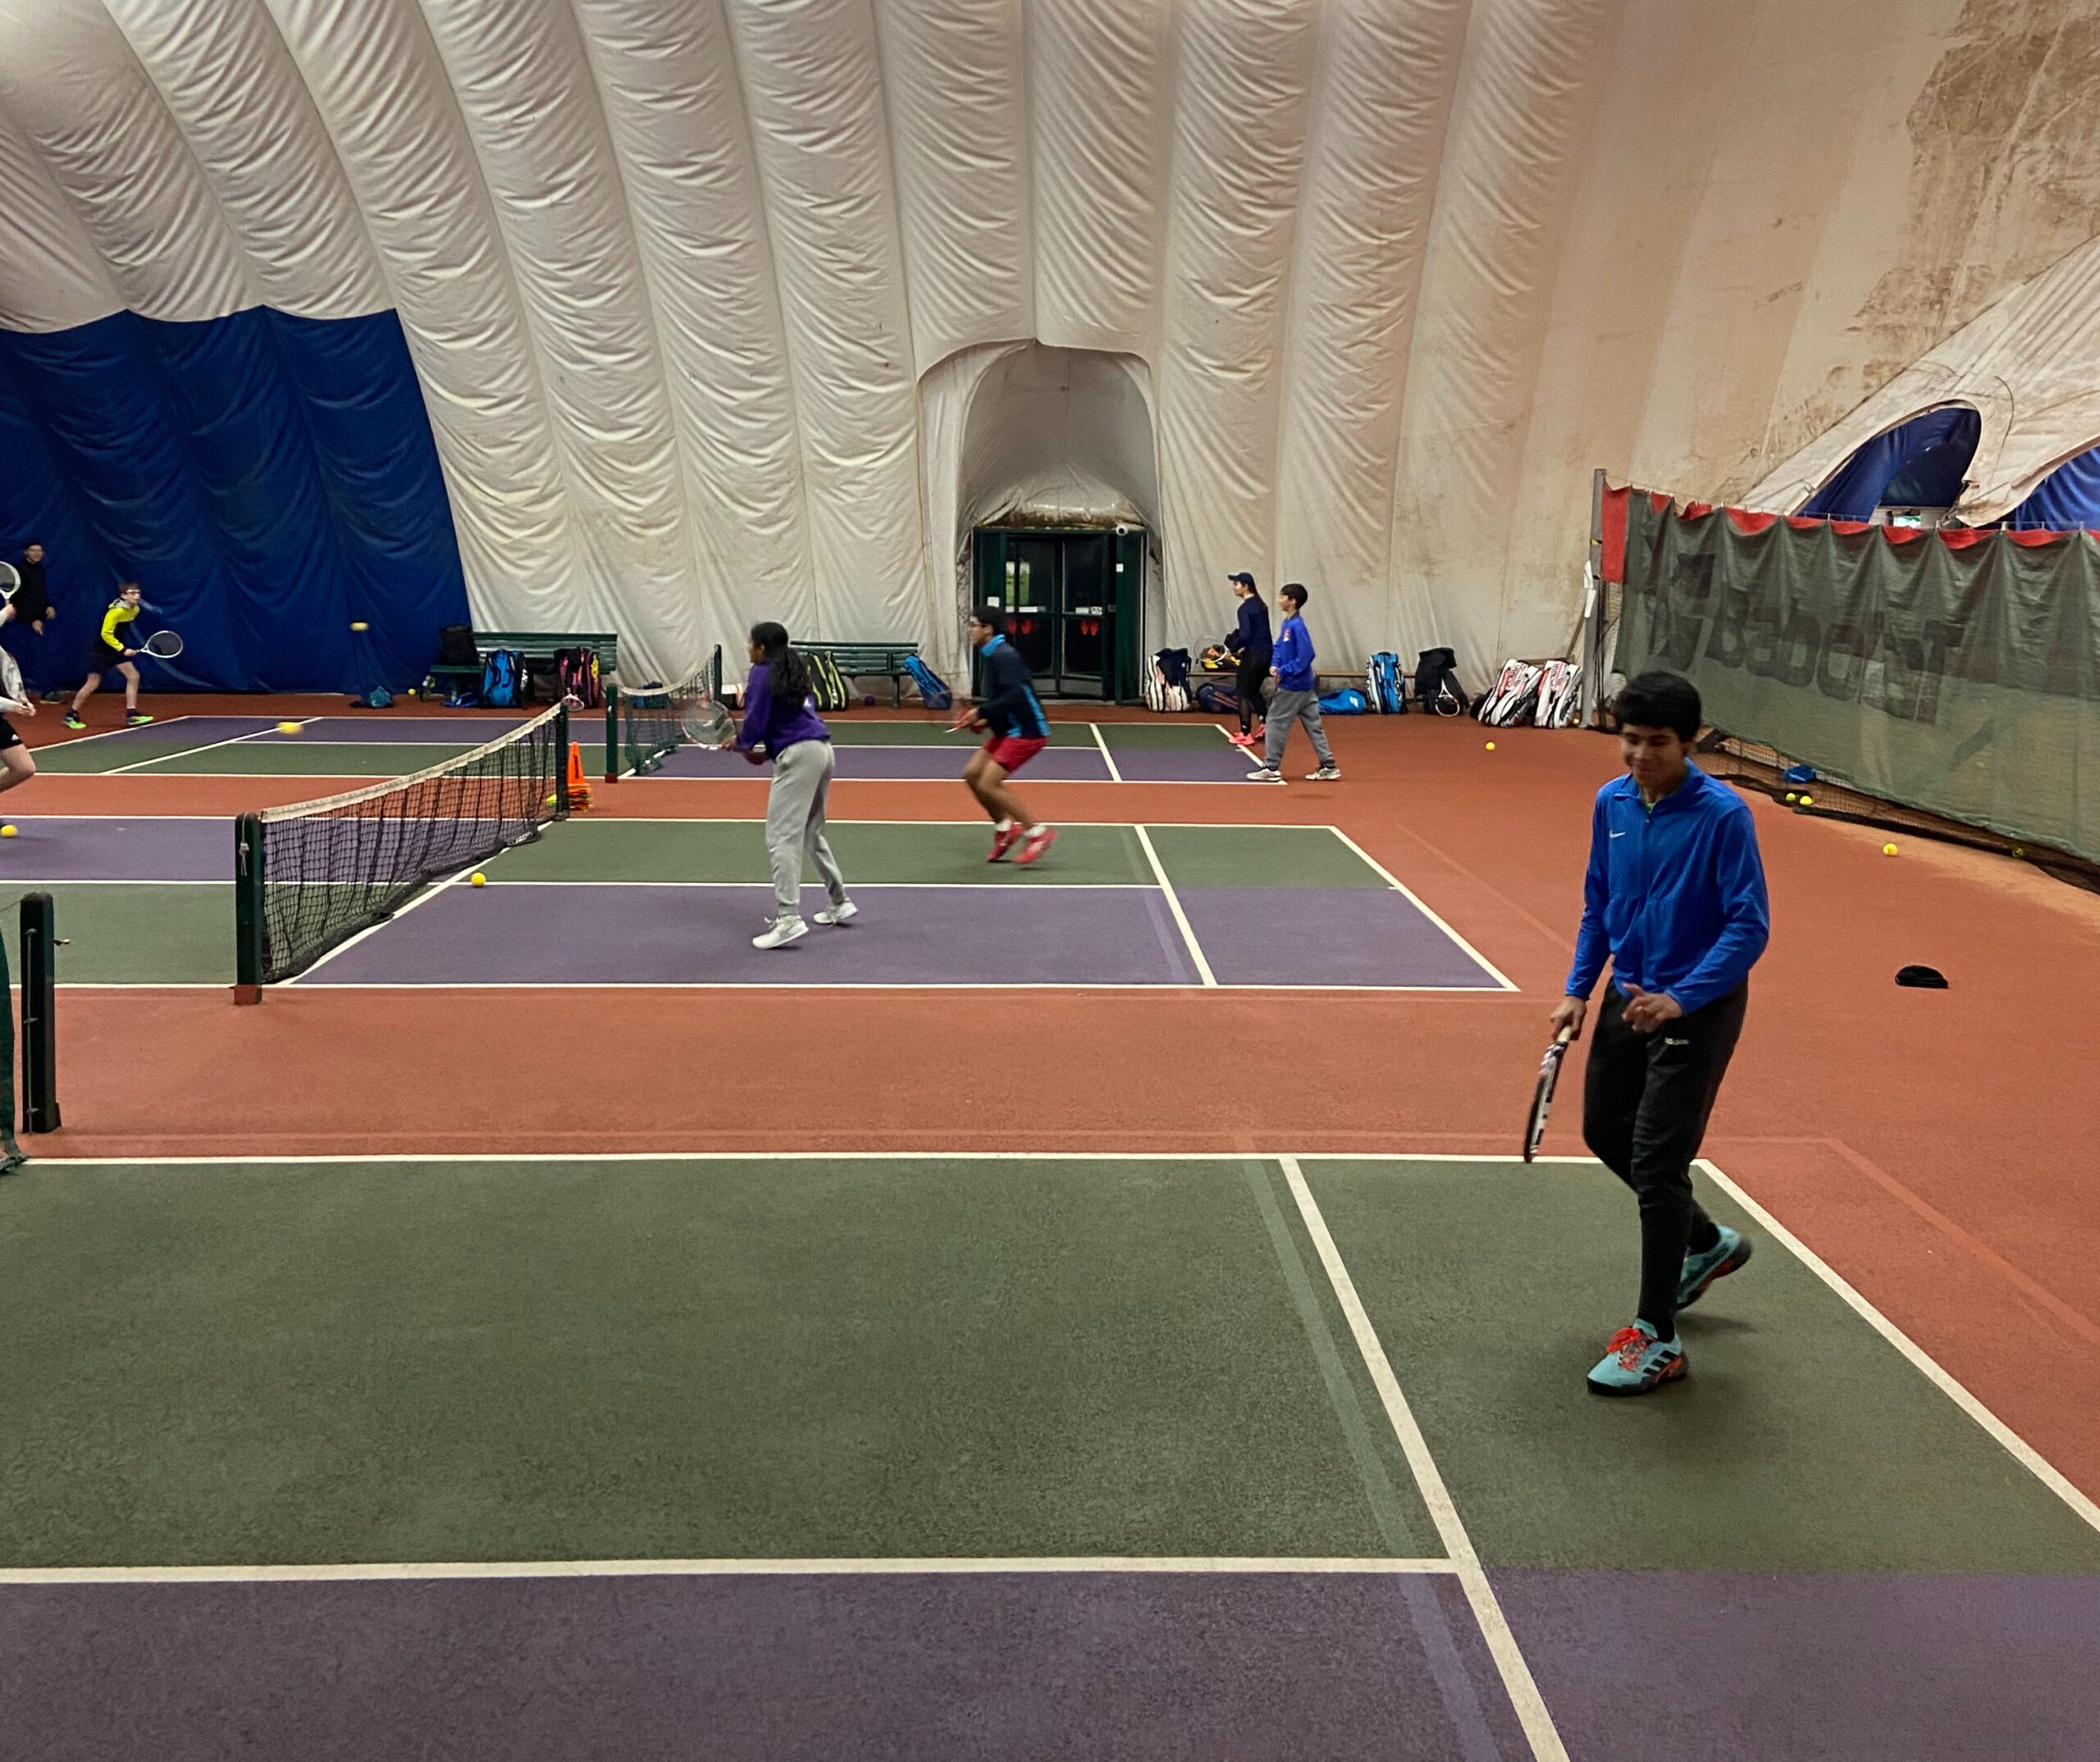 Halton tennis session youth indoor tennis lessons